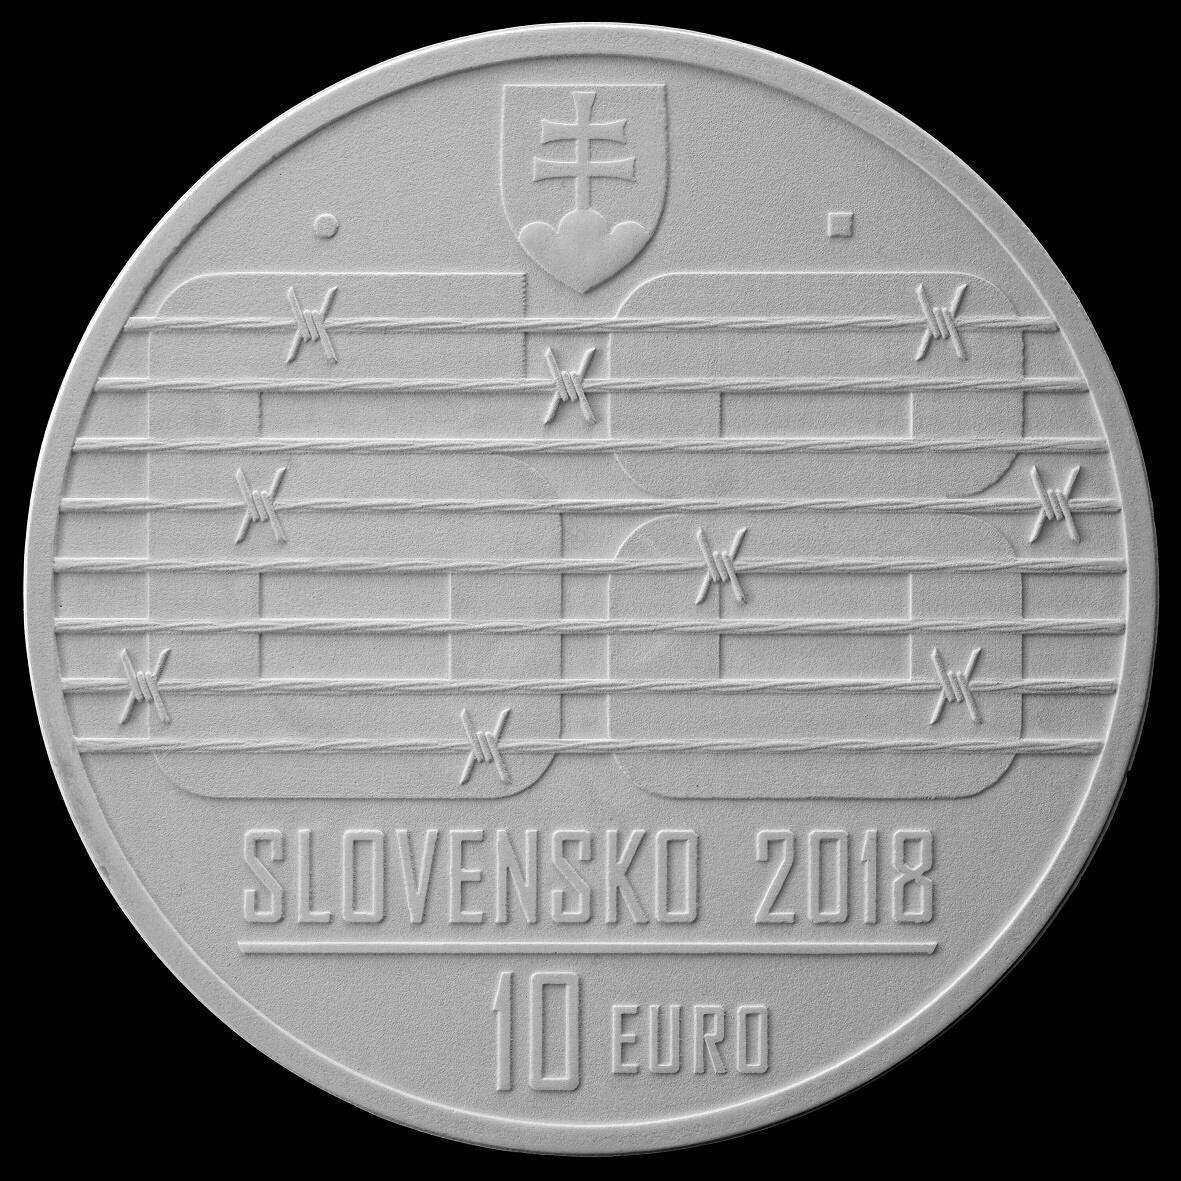 Third prize and the design selected for the coin